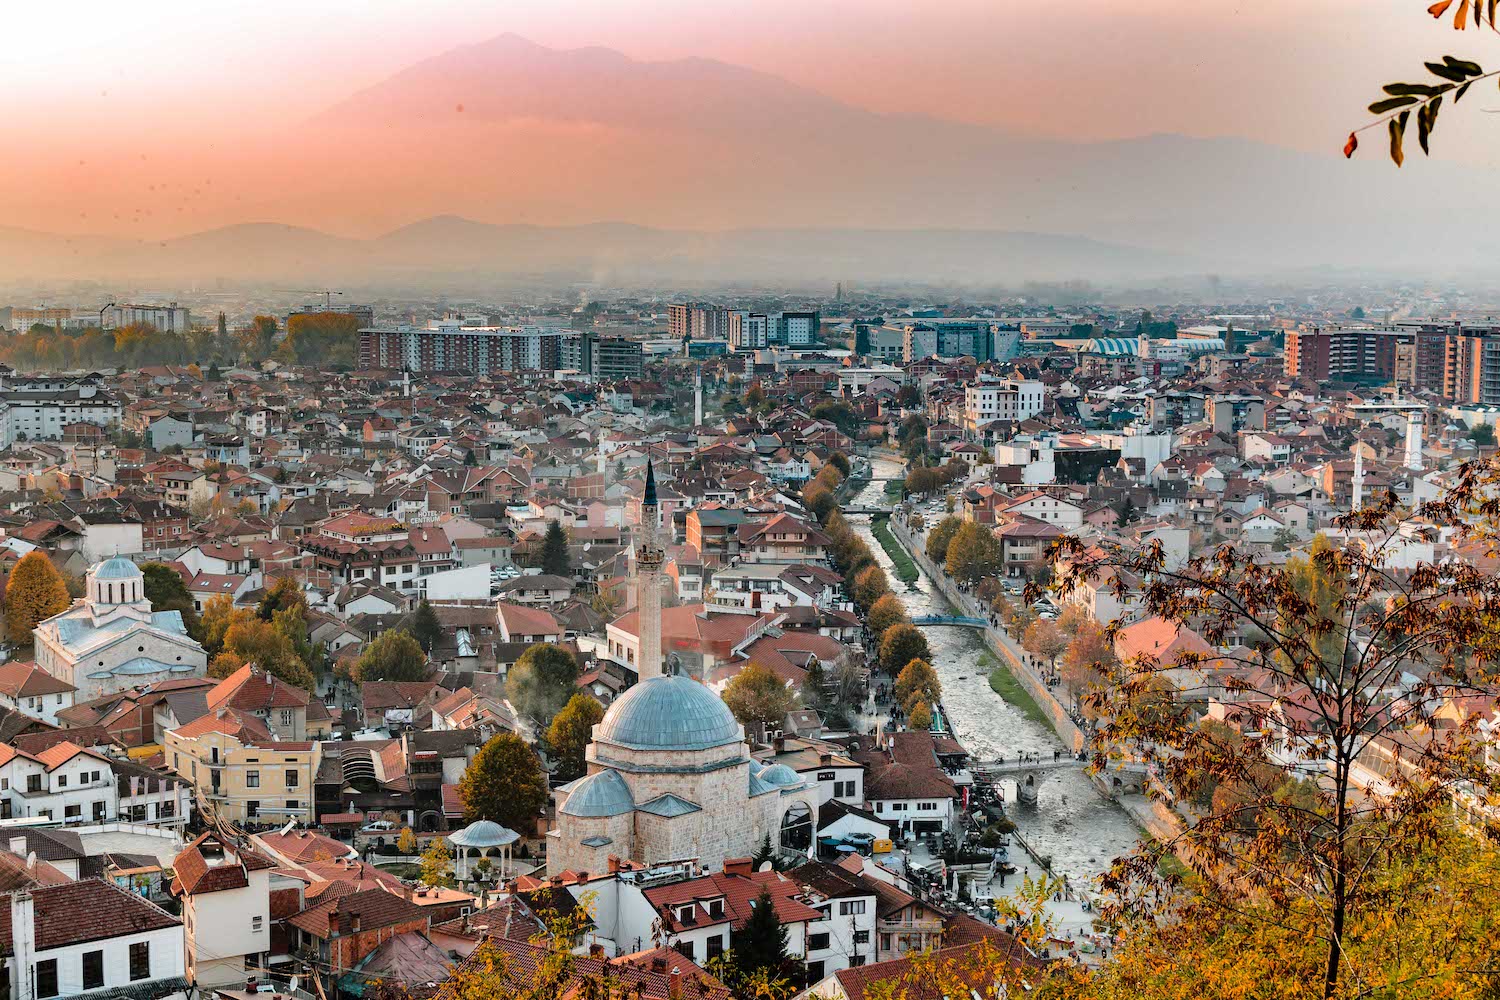 View of Prizren from Prizren fortress.